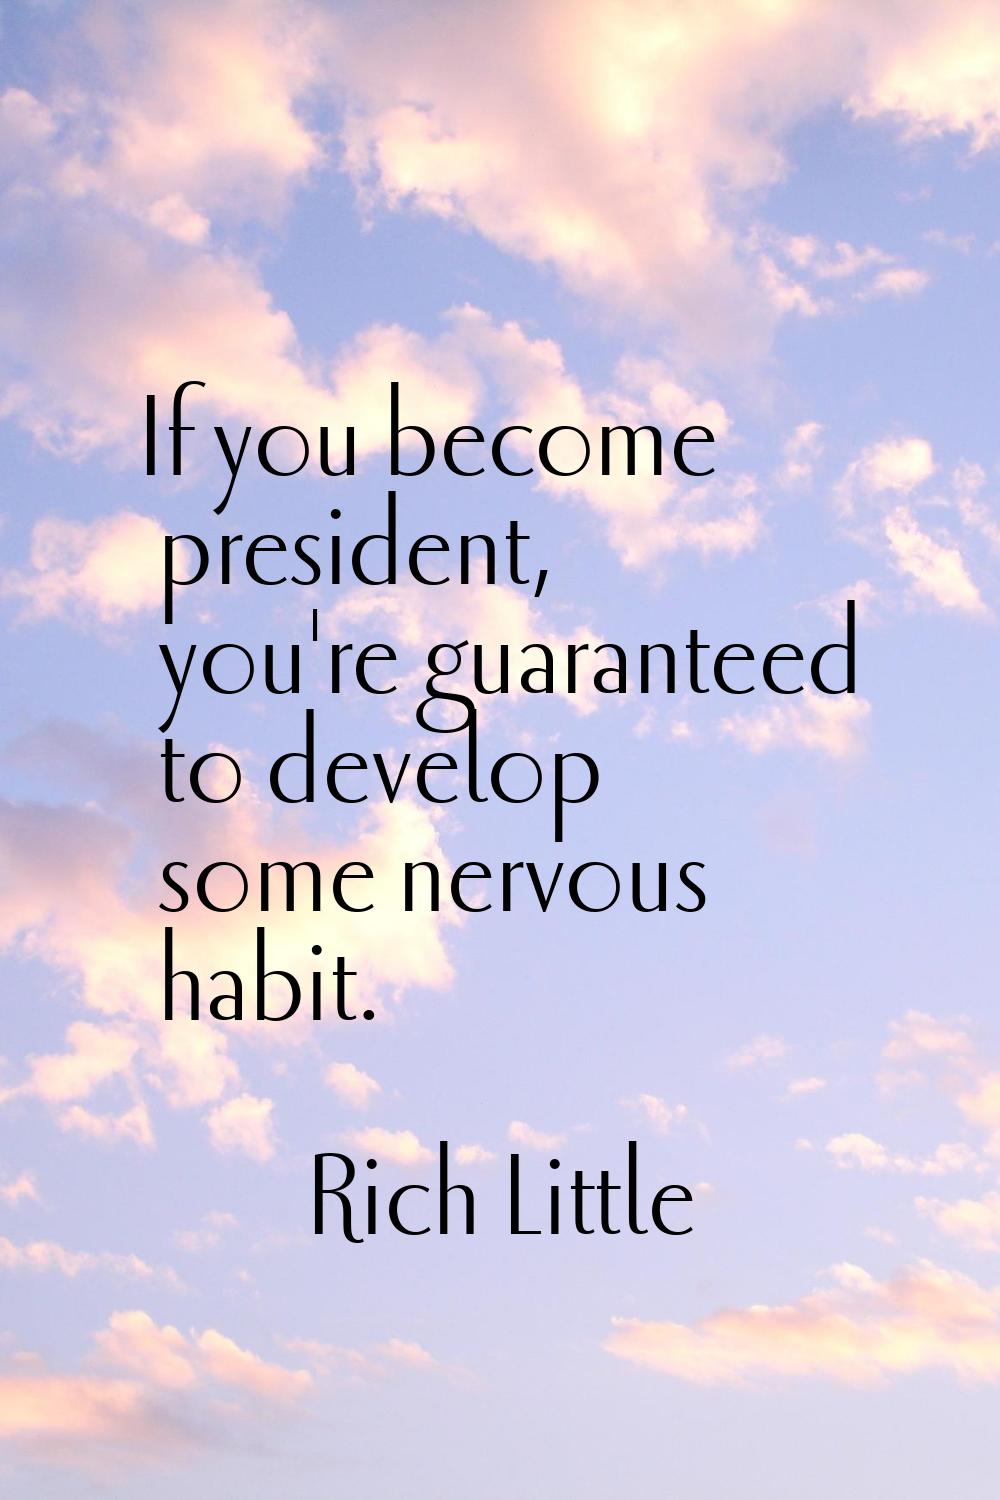 If you become president, you're guaranteed to develop some nervous habit.